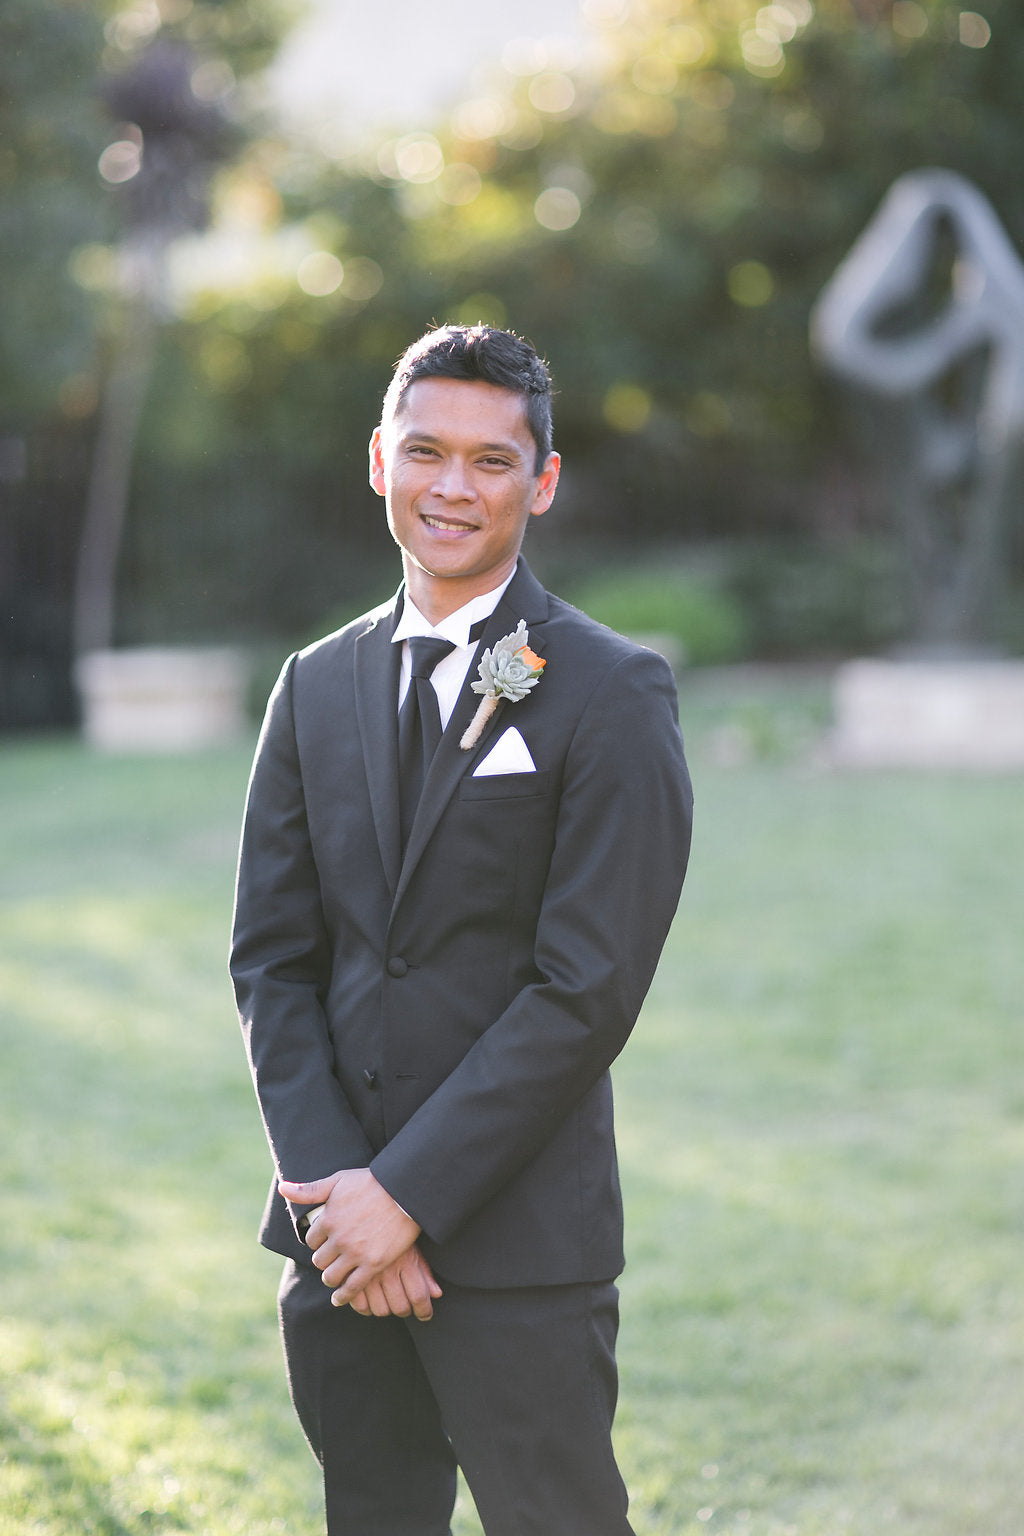 Groom Portrait | Fall Wedding at the San Diego Museum of Art | Photos by Petula Pea Photography